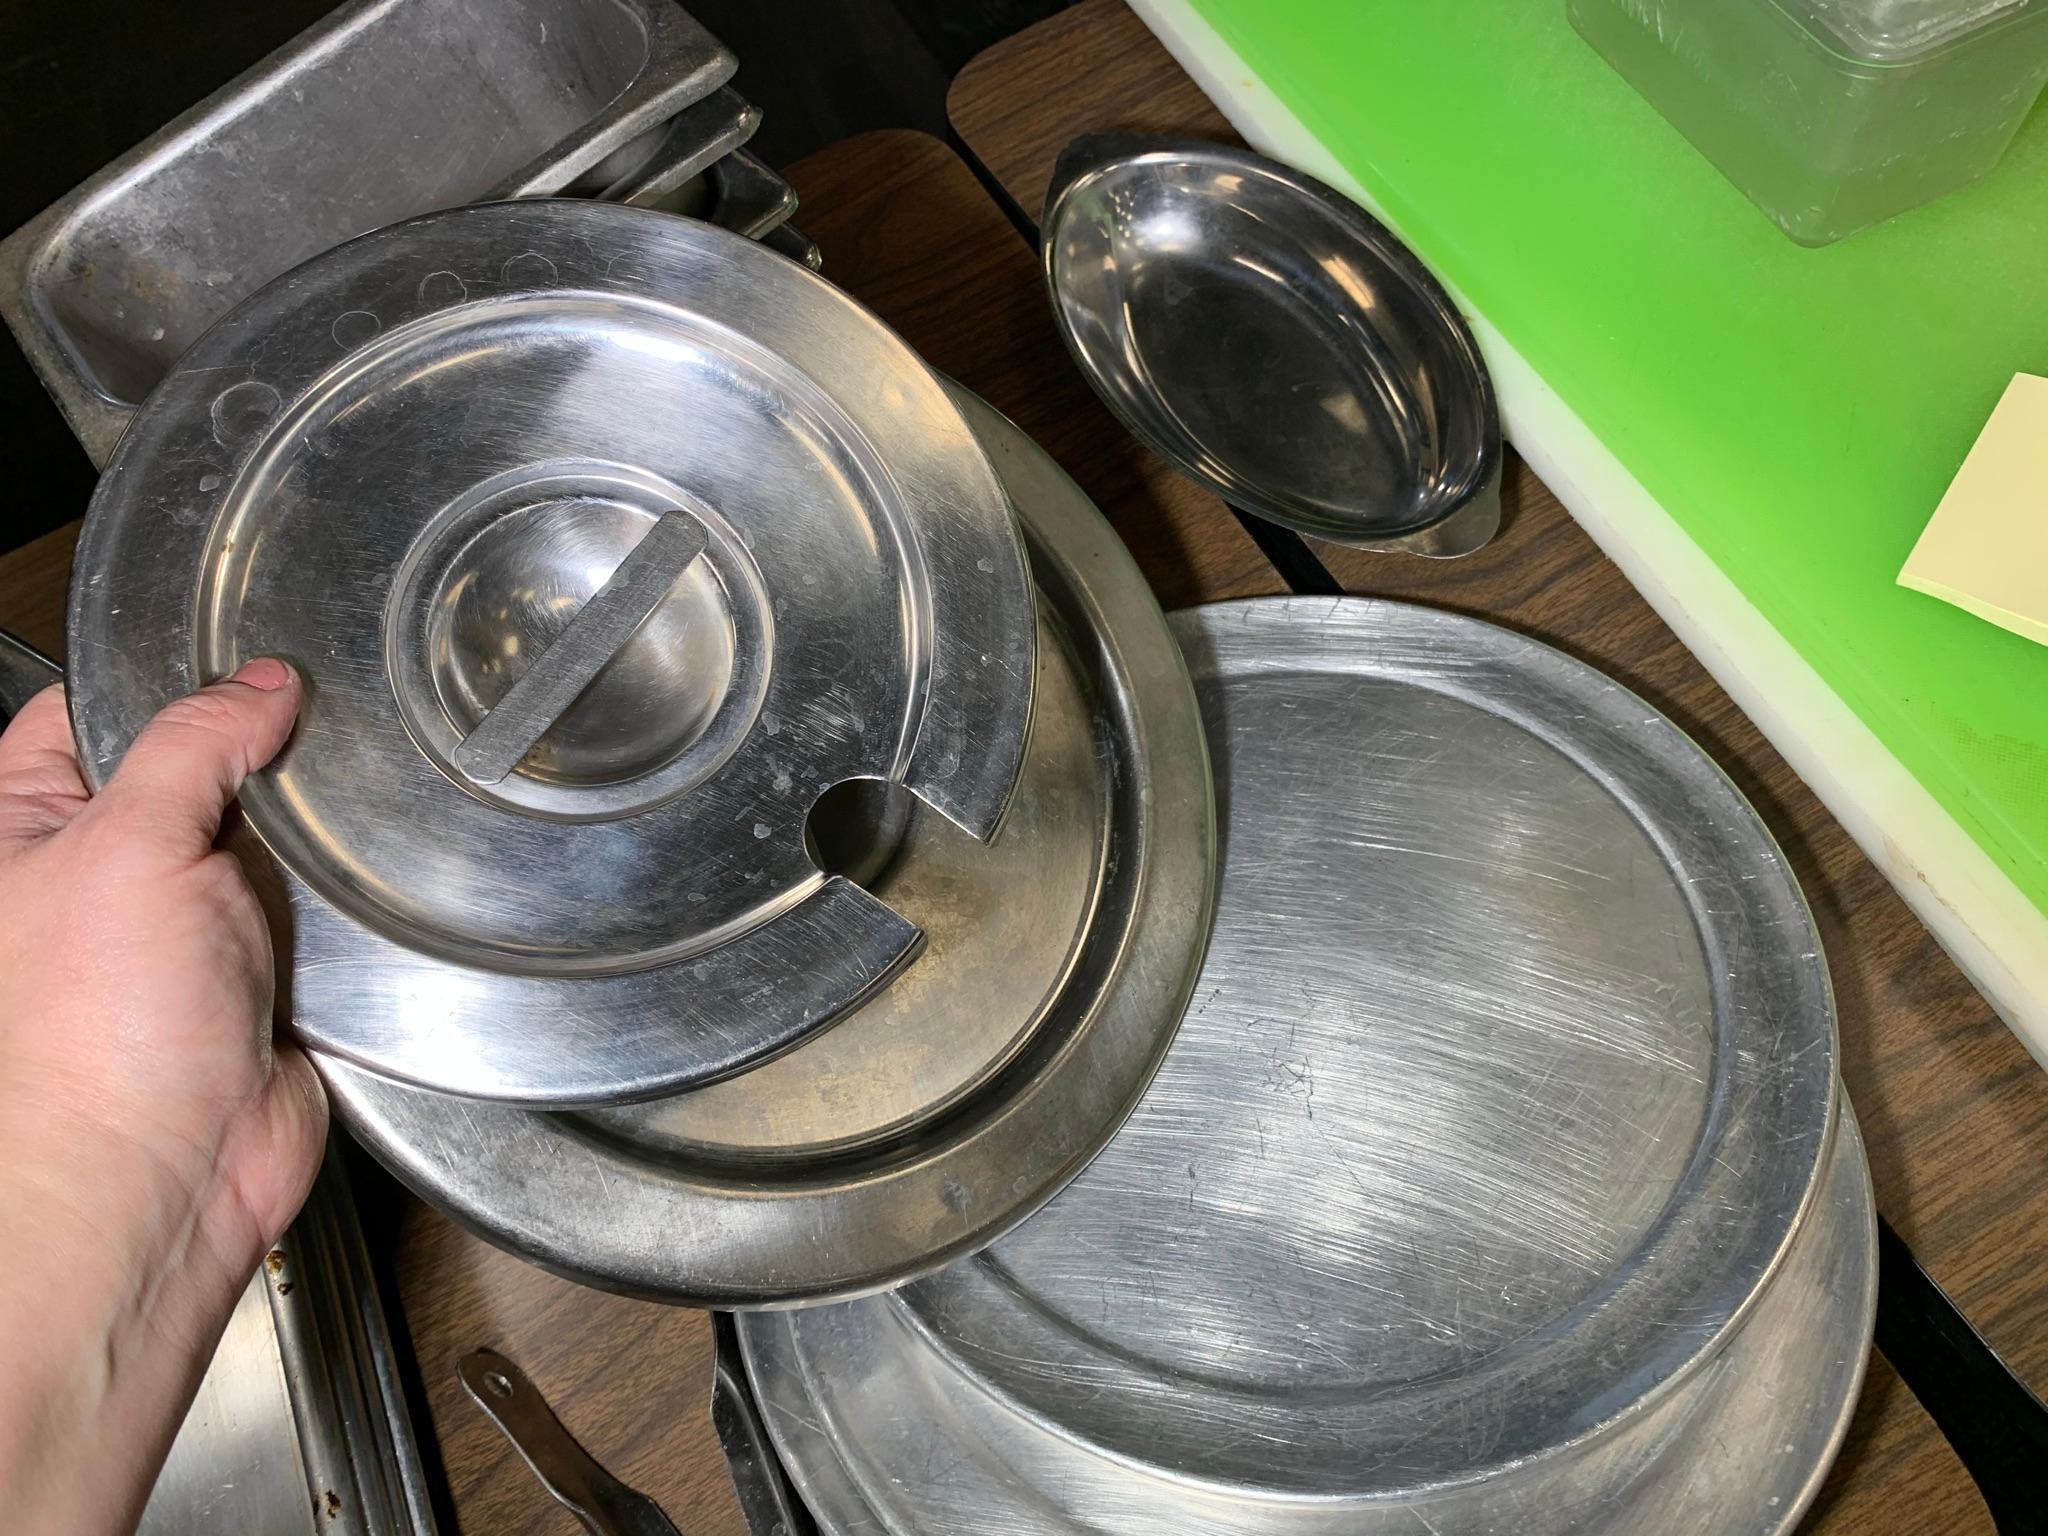 Assortment of Stainless Steel SNF Steam Table Pans, Trays, Lids, and Squeeze Bottle Holder